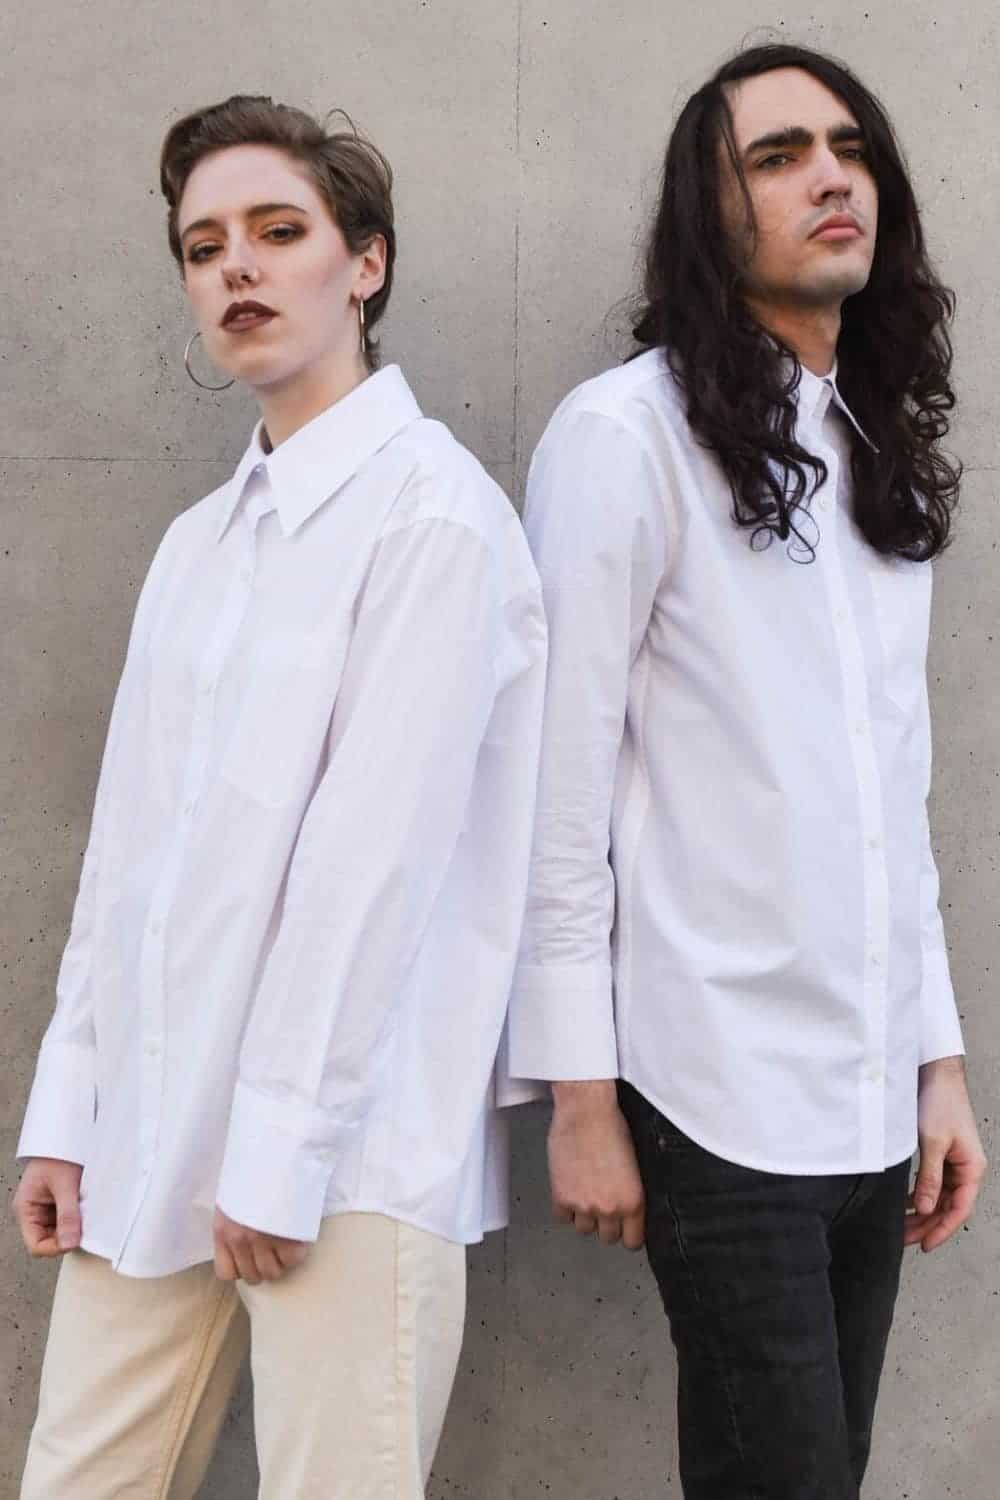 Gender Neutral Clothing: 8 Brands For Ethical Fluid Fashion